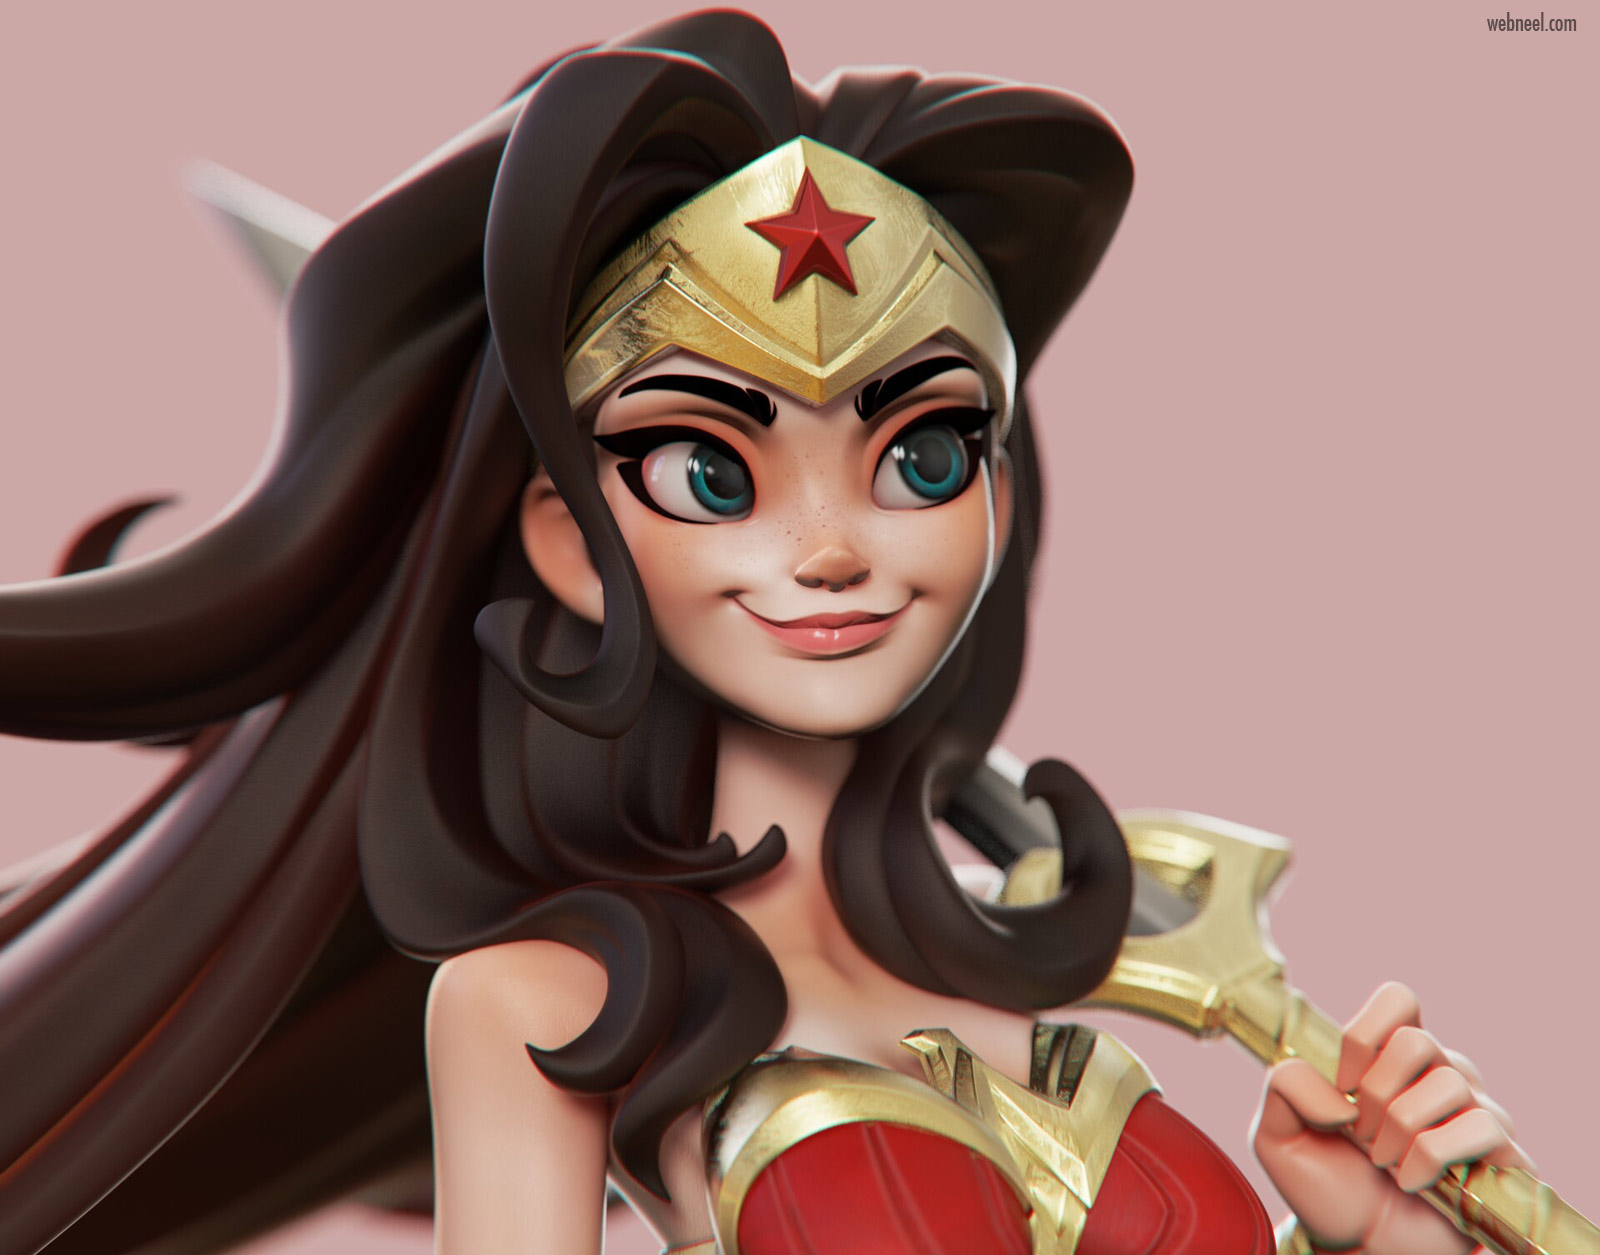 3d model character design girl fighter super woman fantasy by chen longfei